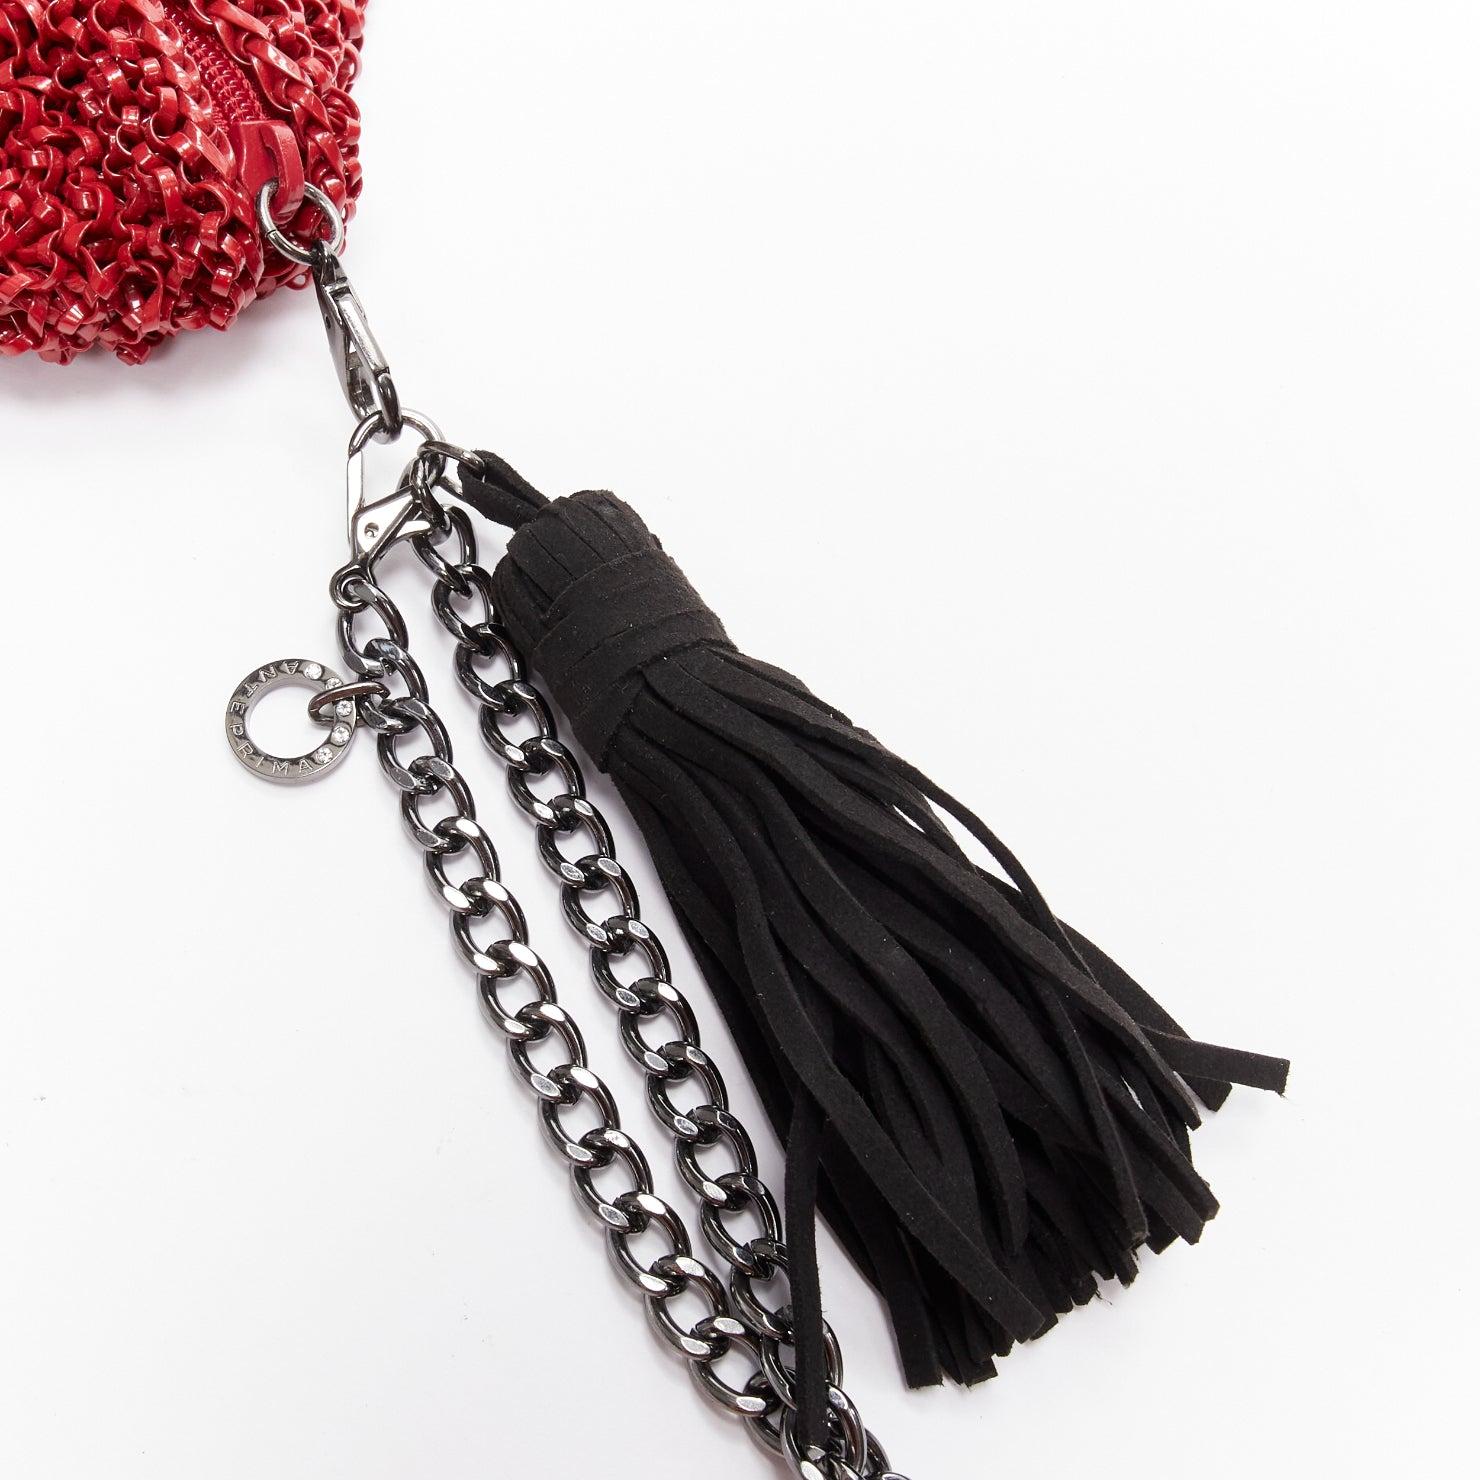 rare ANTEPRIMA Wire Bag red black leather tassel silver chain clutch For Sale 3